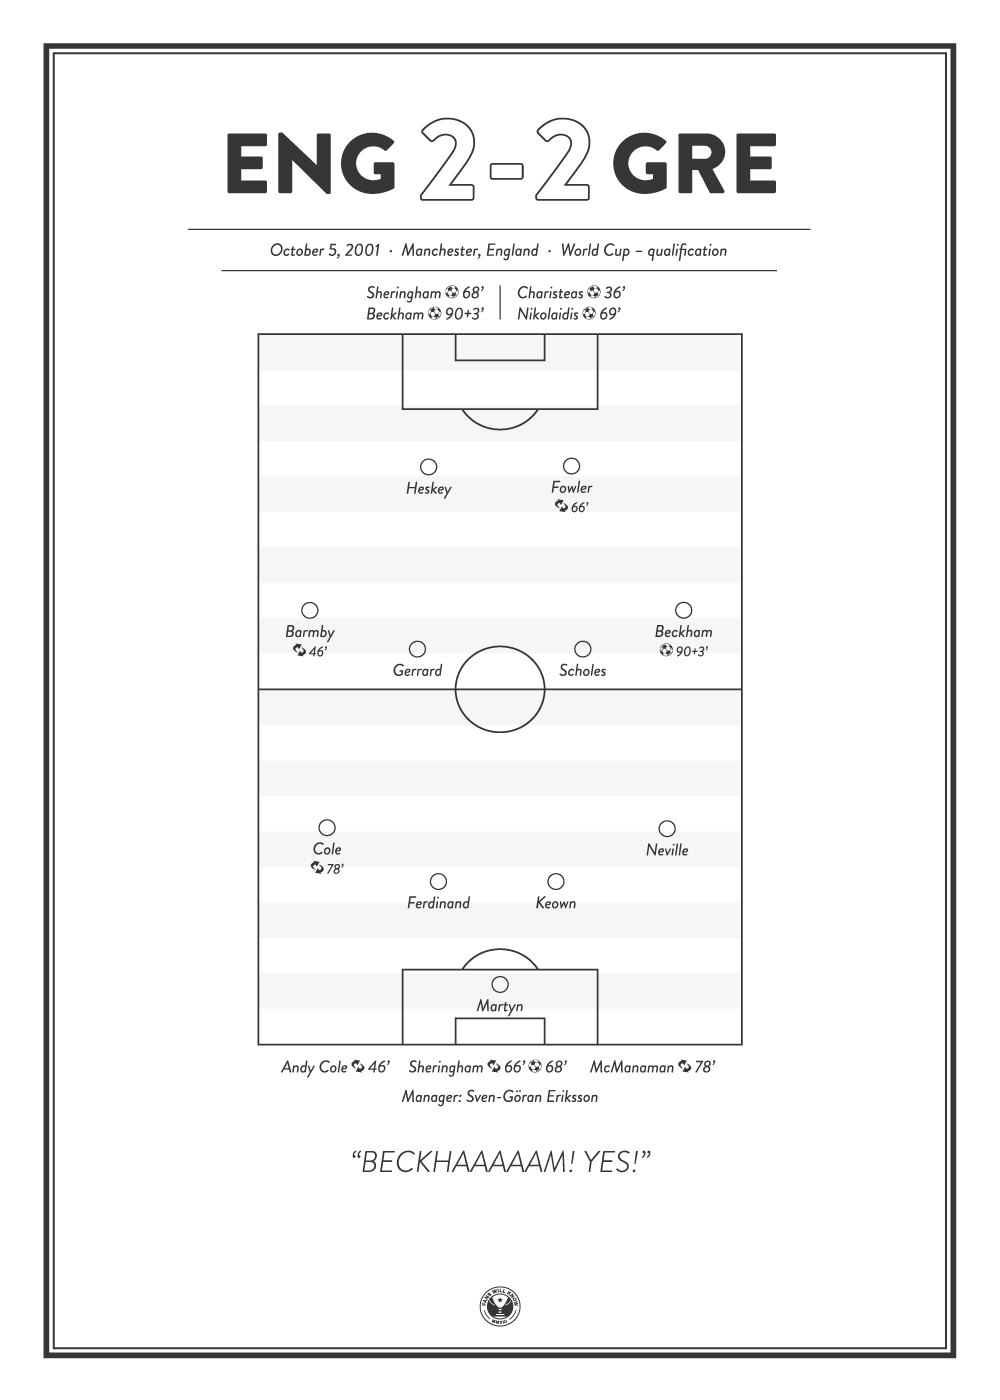 Football poster showing englands lineup from their 2001 world cup qualifying game vs greece